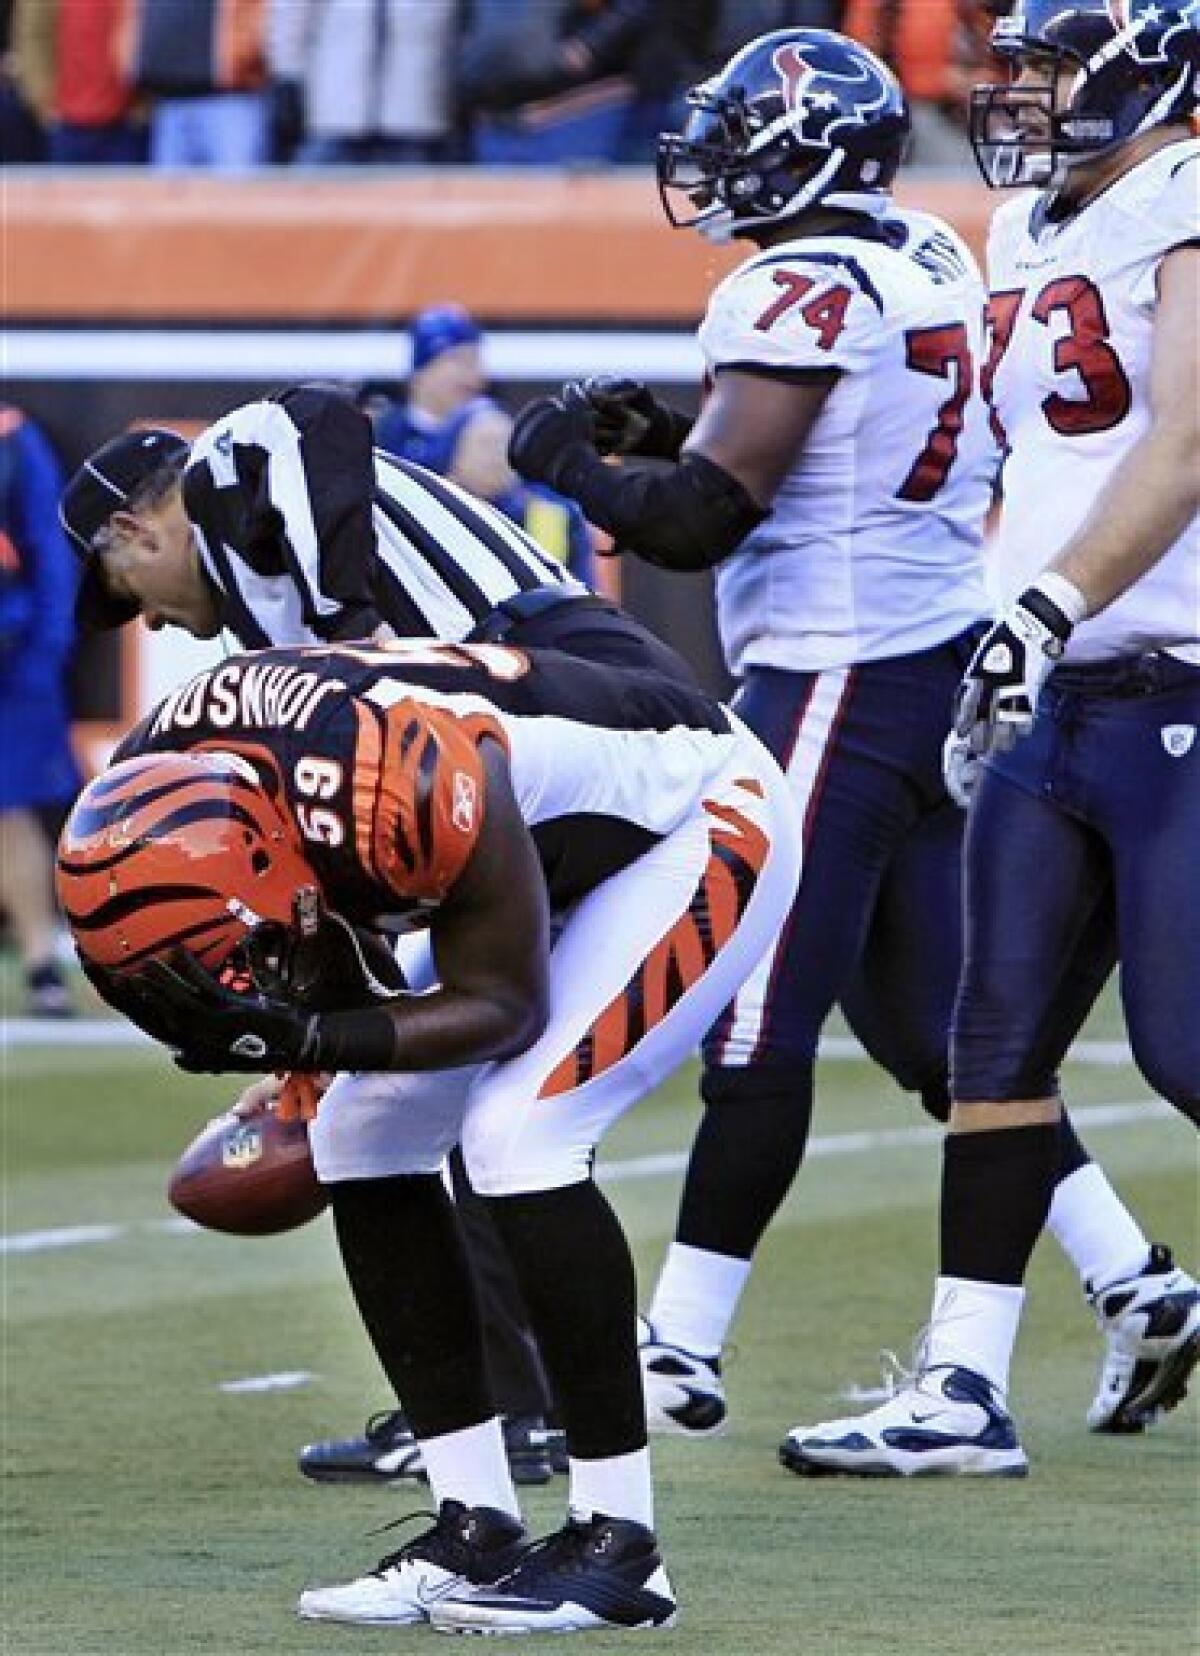 Fading Bengals need help in a lot of ways - The San Diego Union-Tribune